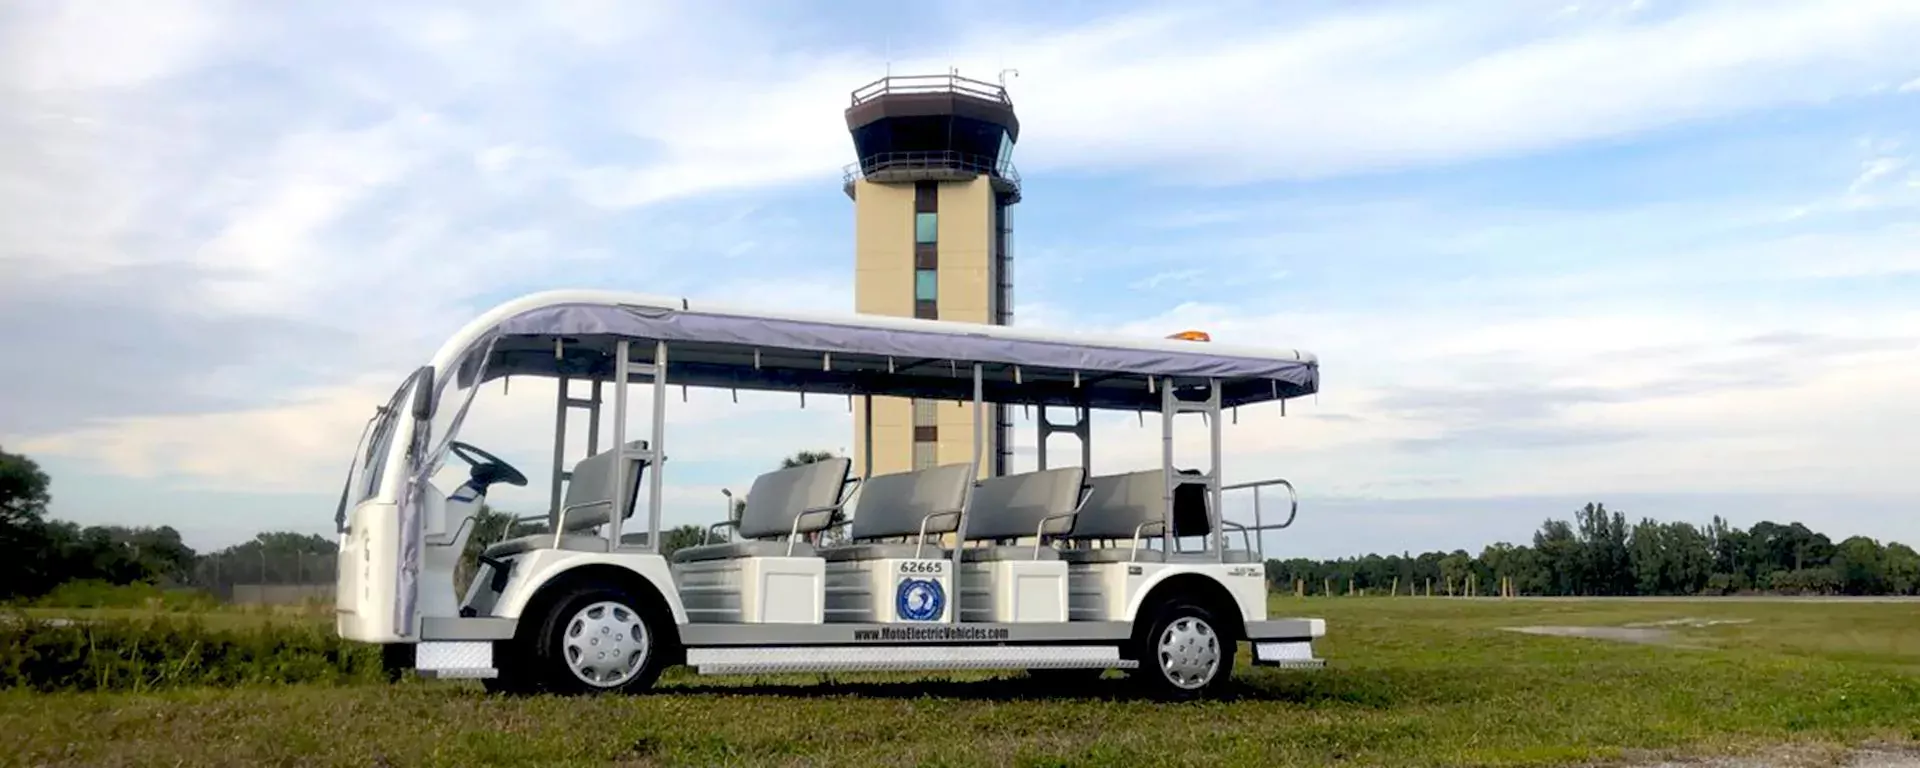 The tram parked near the flight tower at Martin County Airport